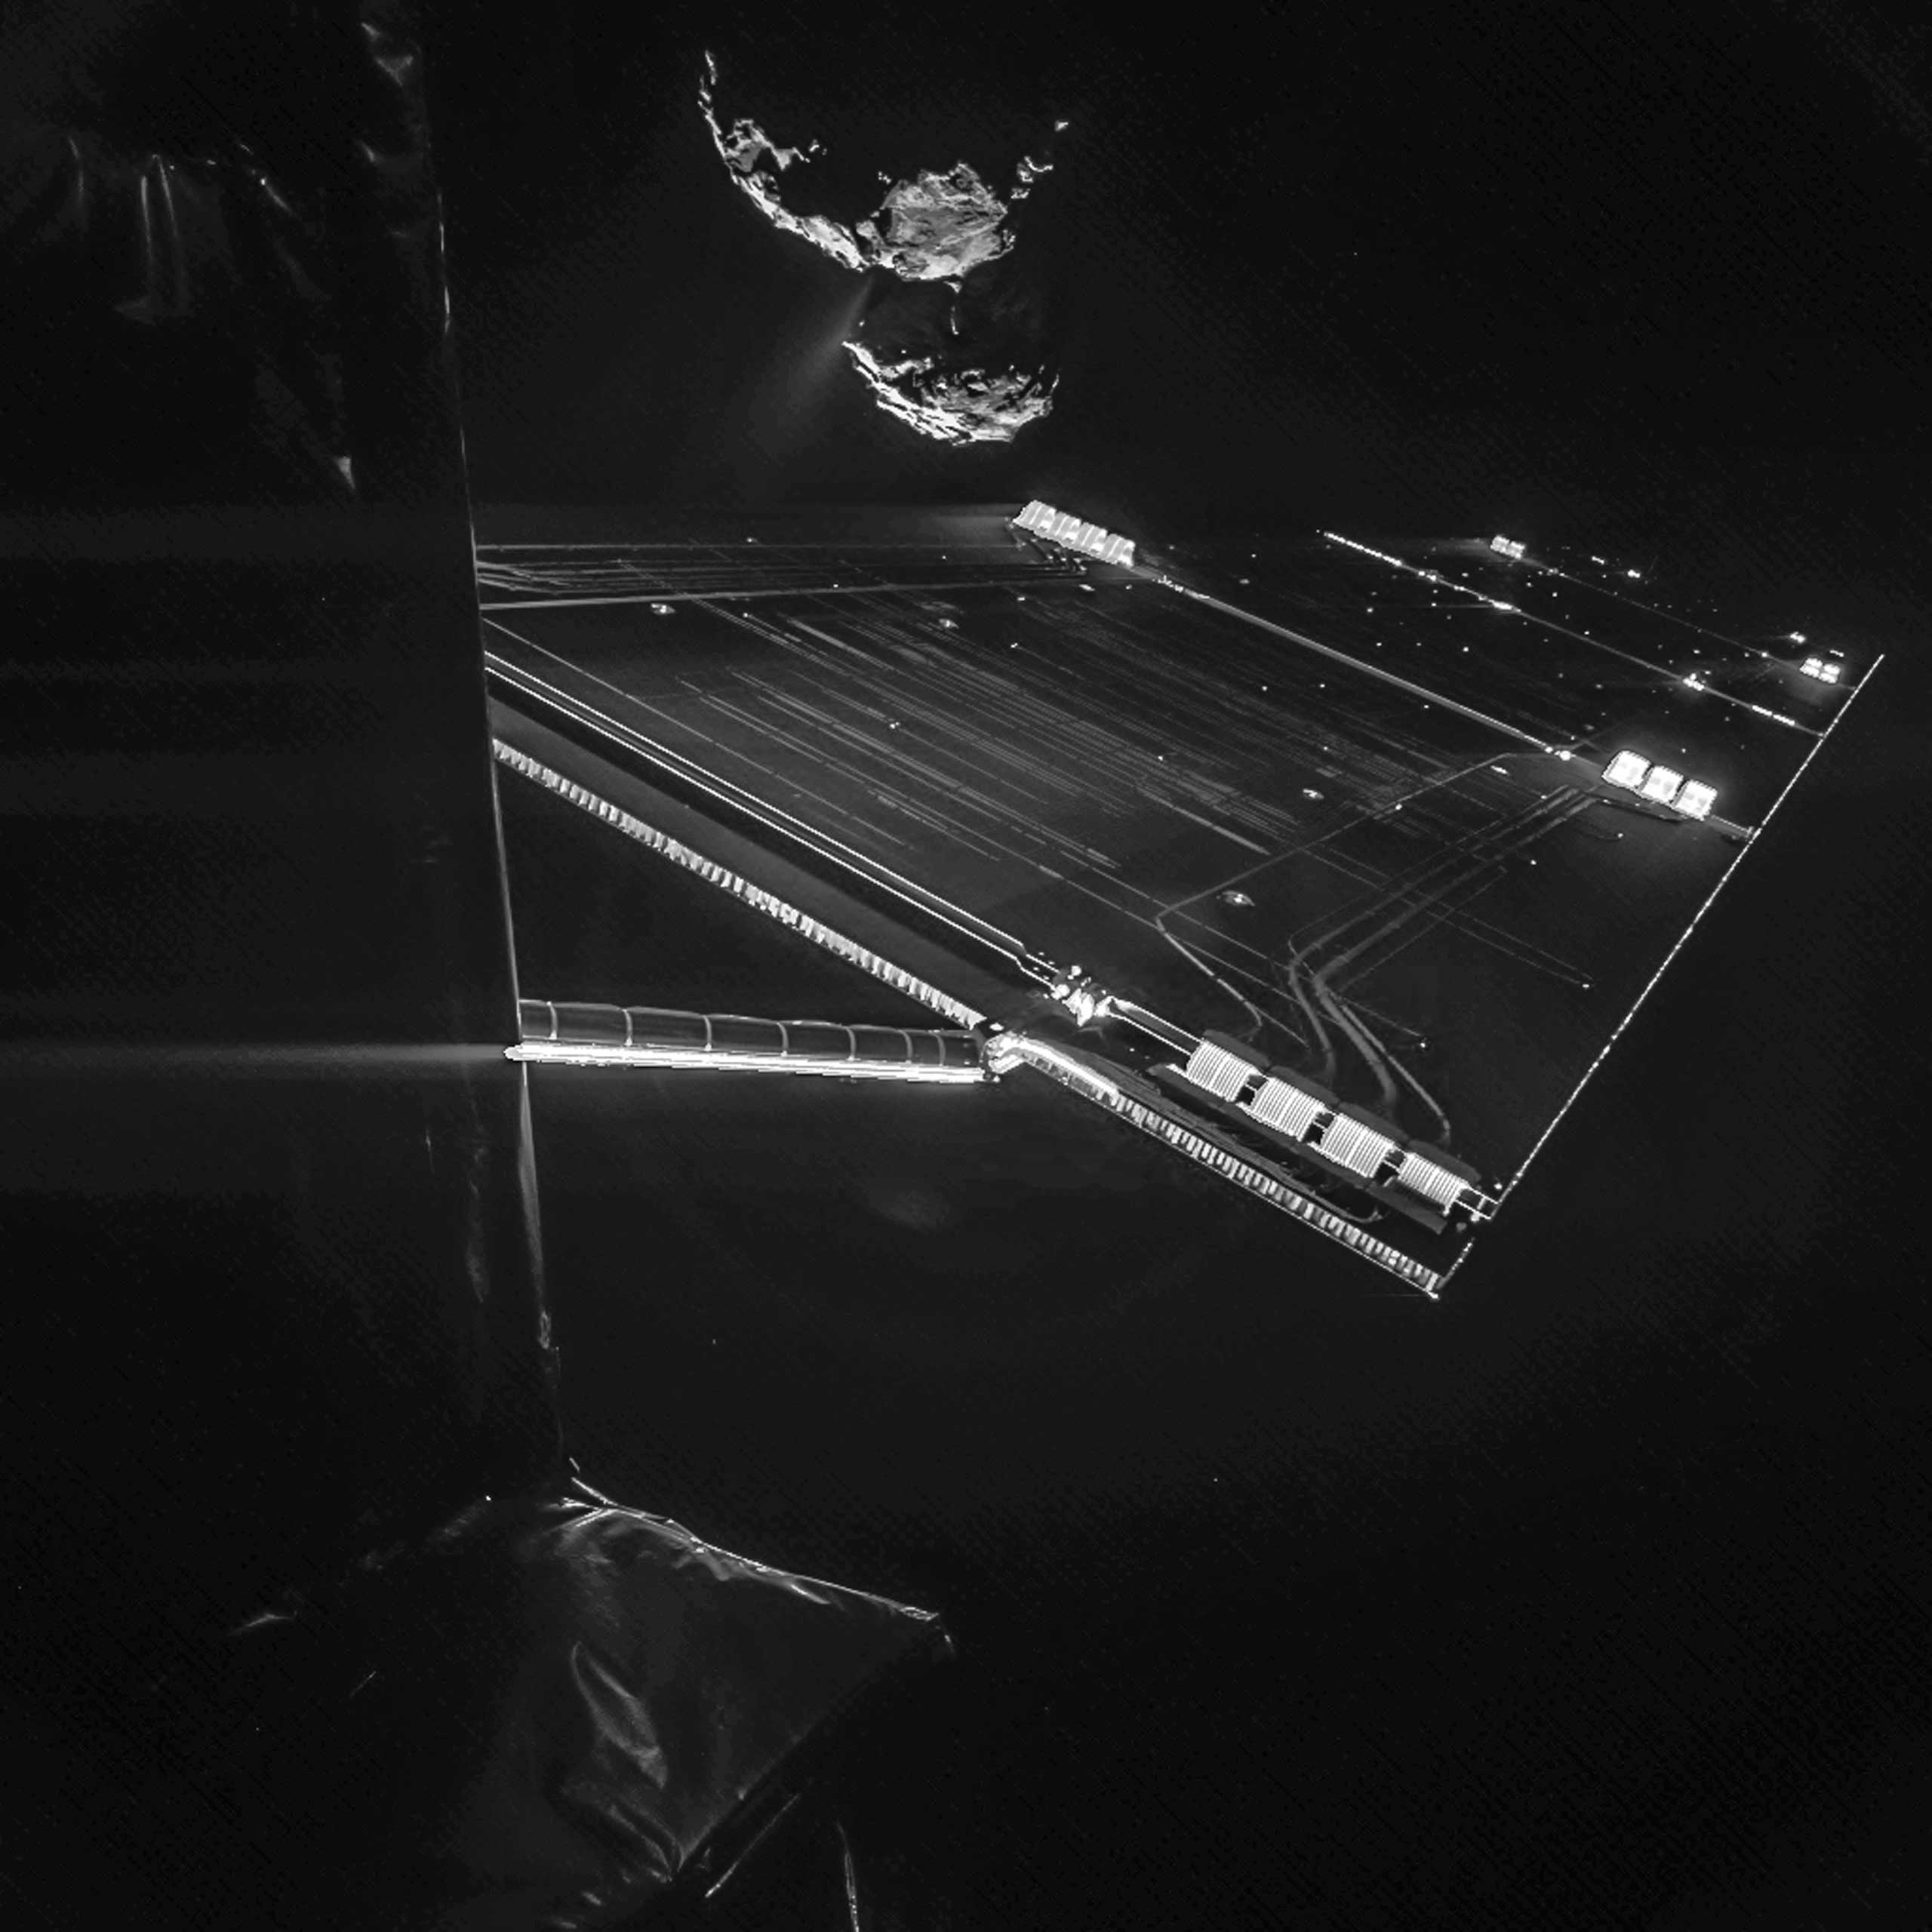 Using the CIVA camera on Rosetta’s Philae lander the spacecraft snapped a ‘selfie’ with a passing comet in this photo released on Oct. 14, 2014.